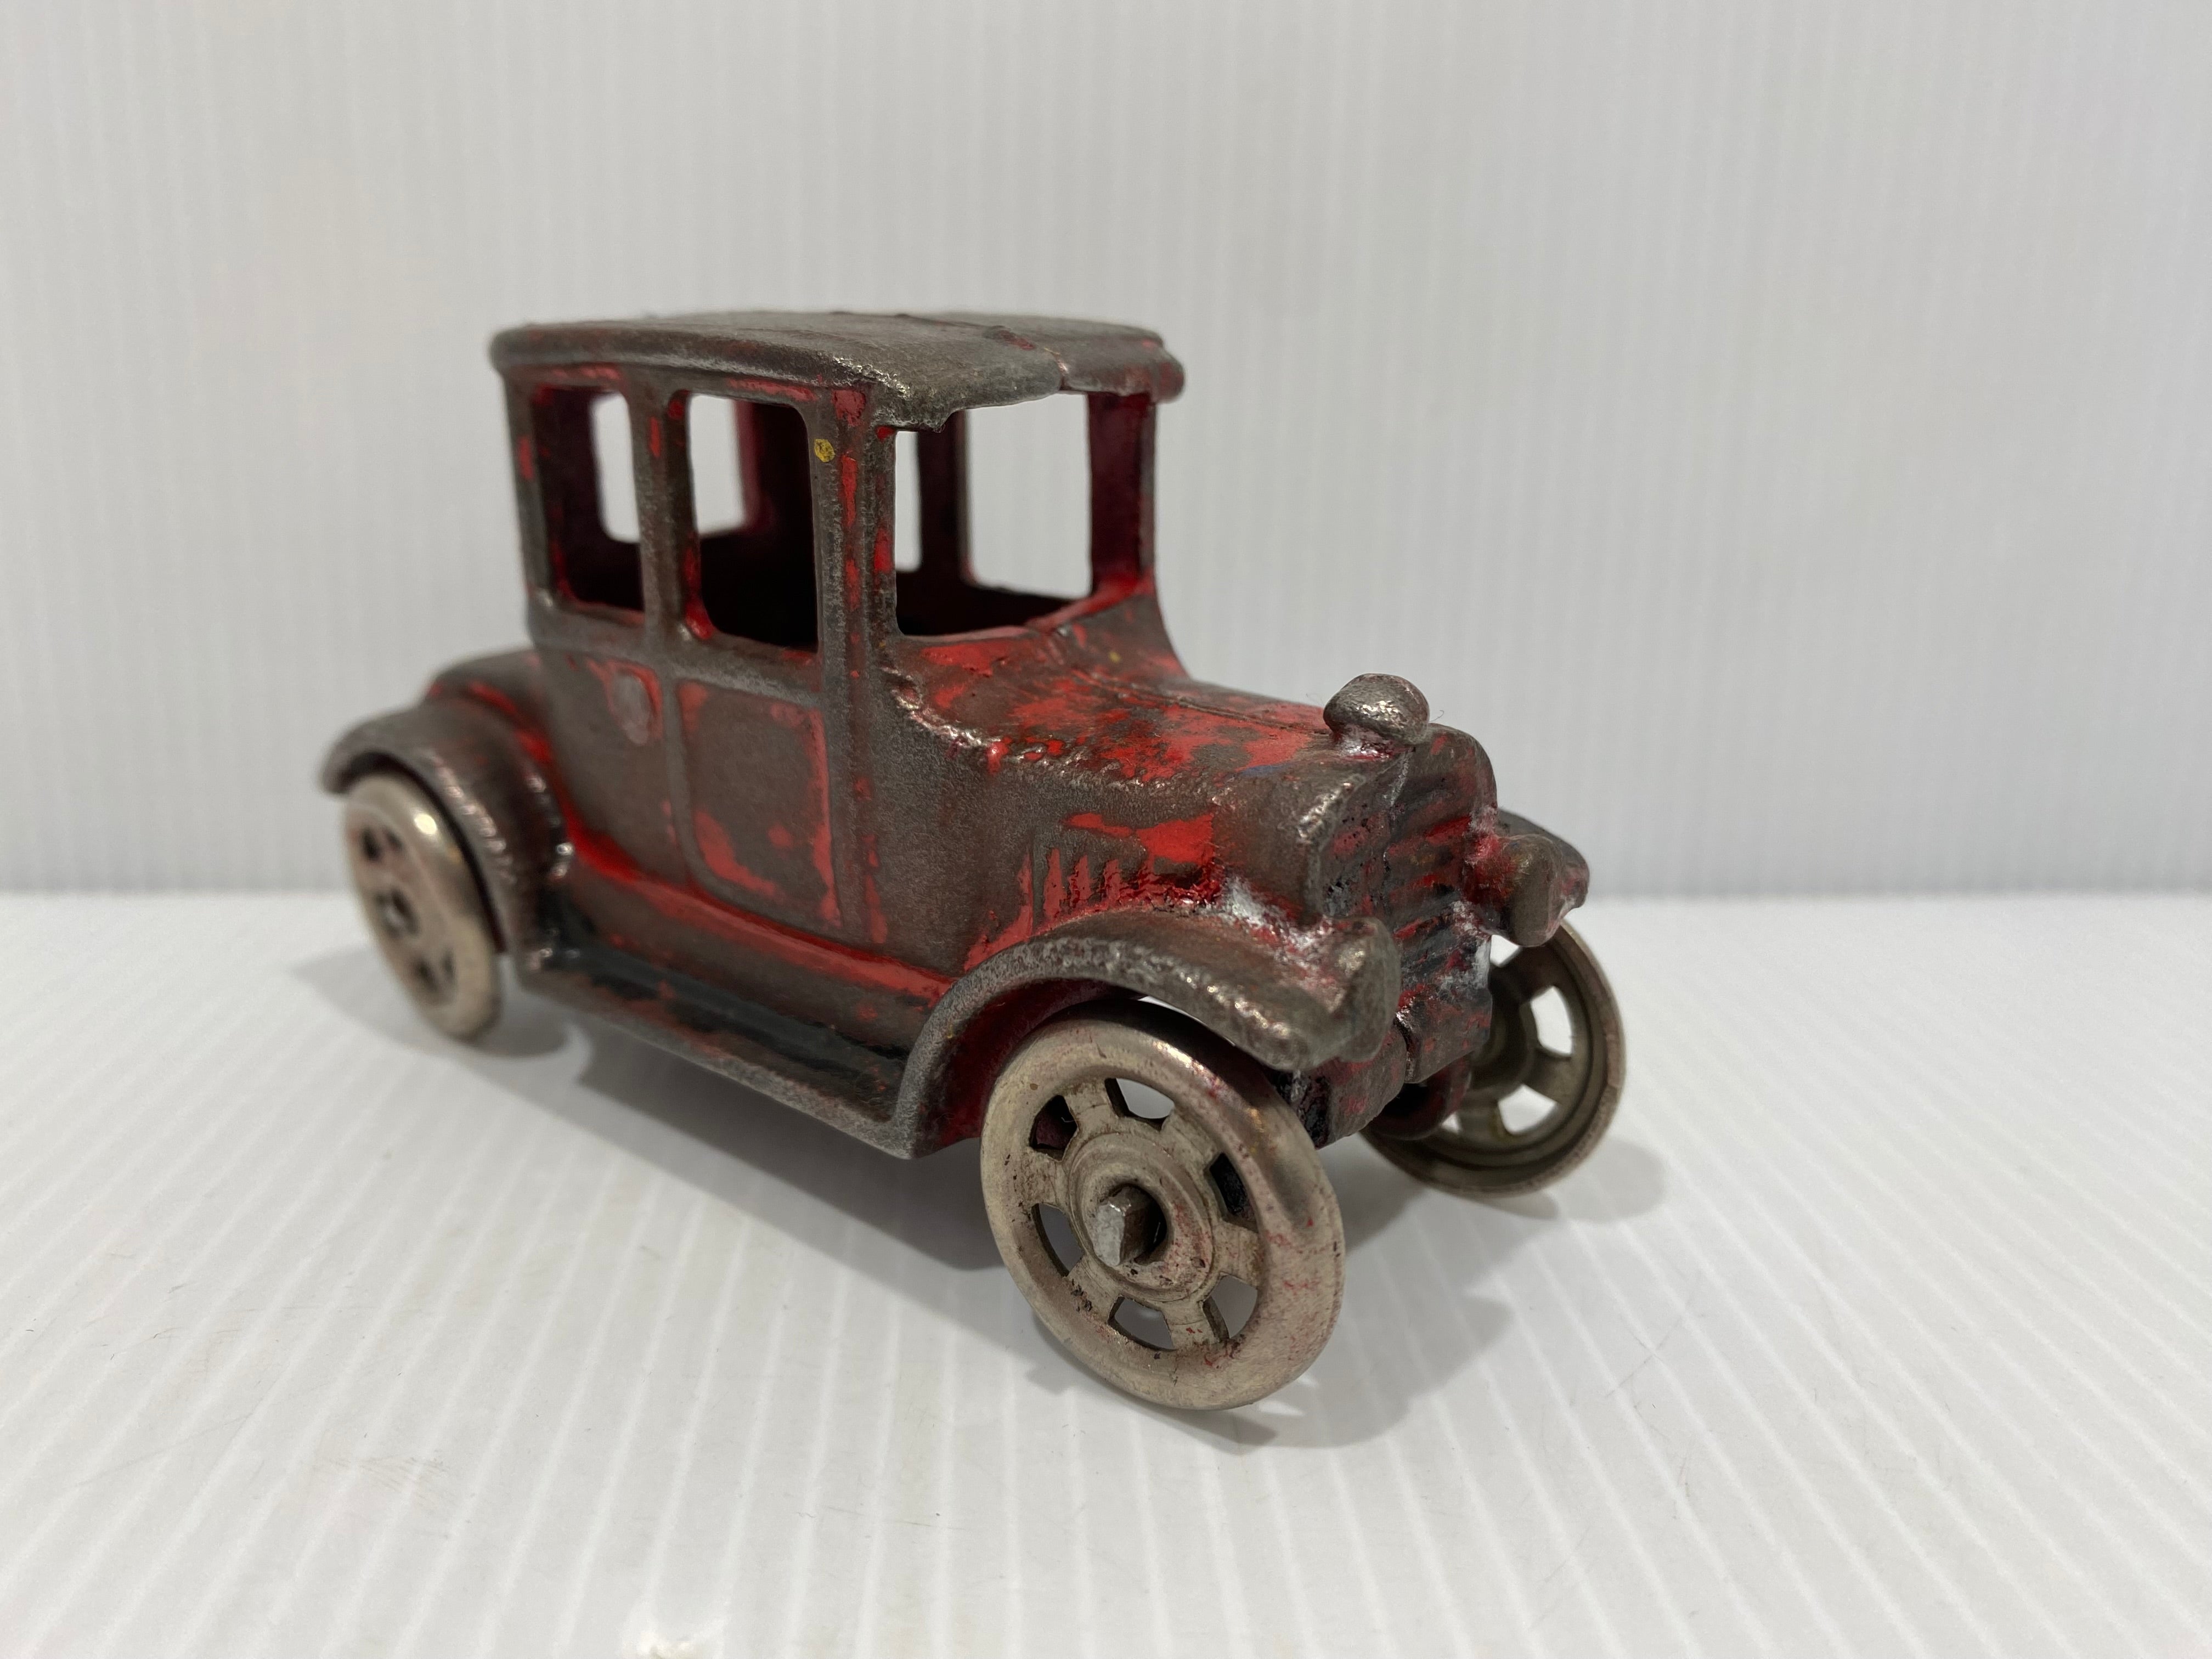 Manufactured by Arcade in the 1920s, this little cast iron car is based on a Ford Model T coupe.